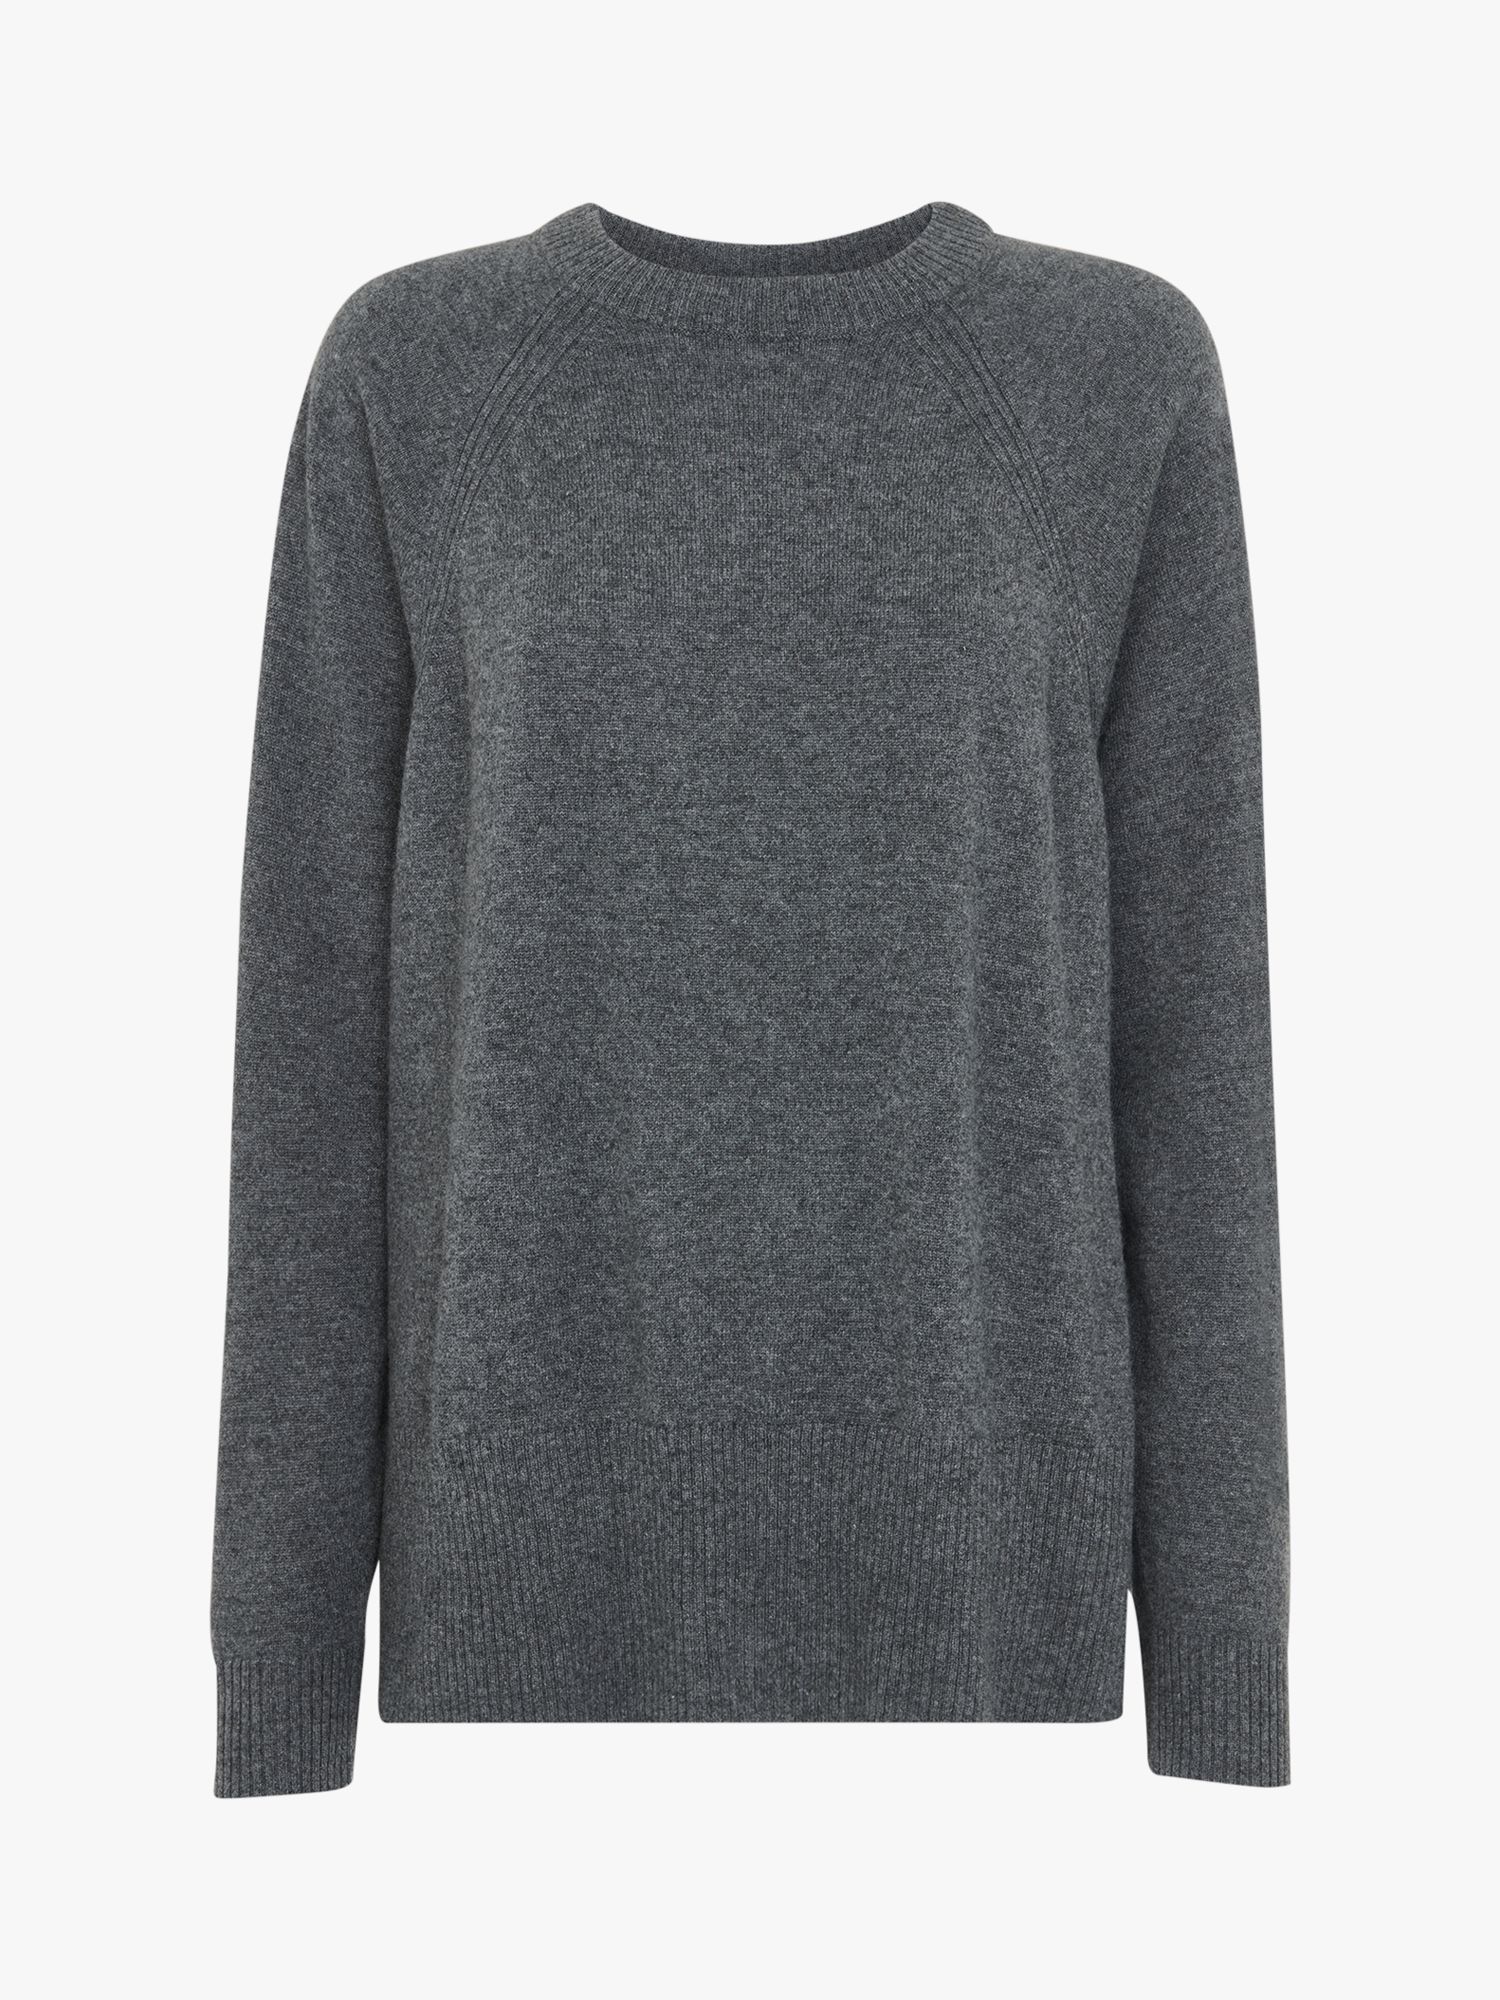 Whistles Ultimate Cashmere Jumper, Grey, XS